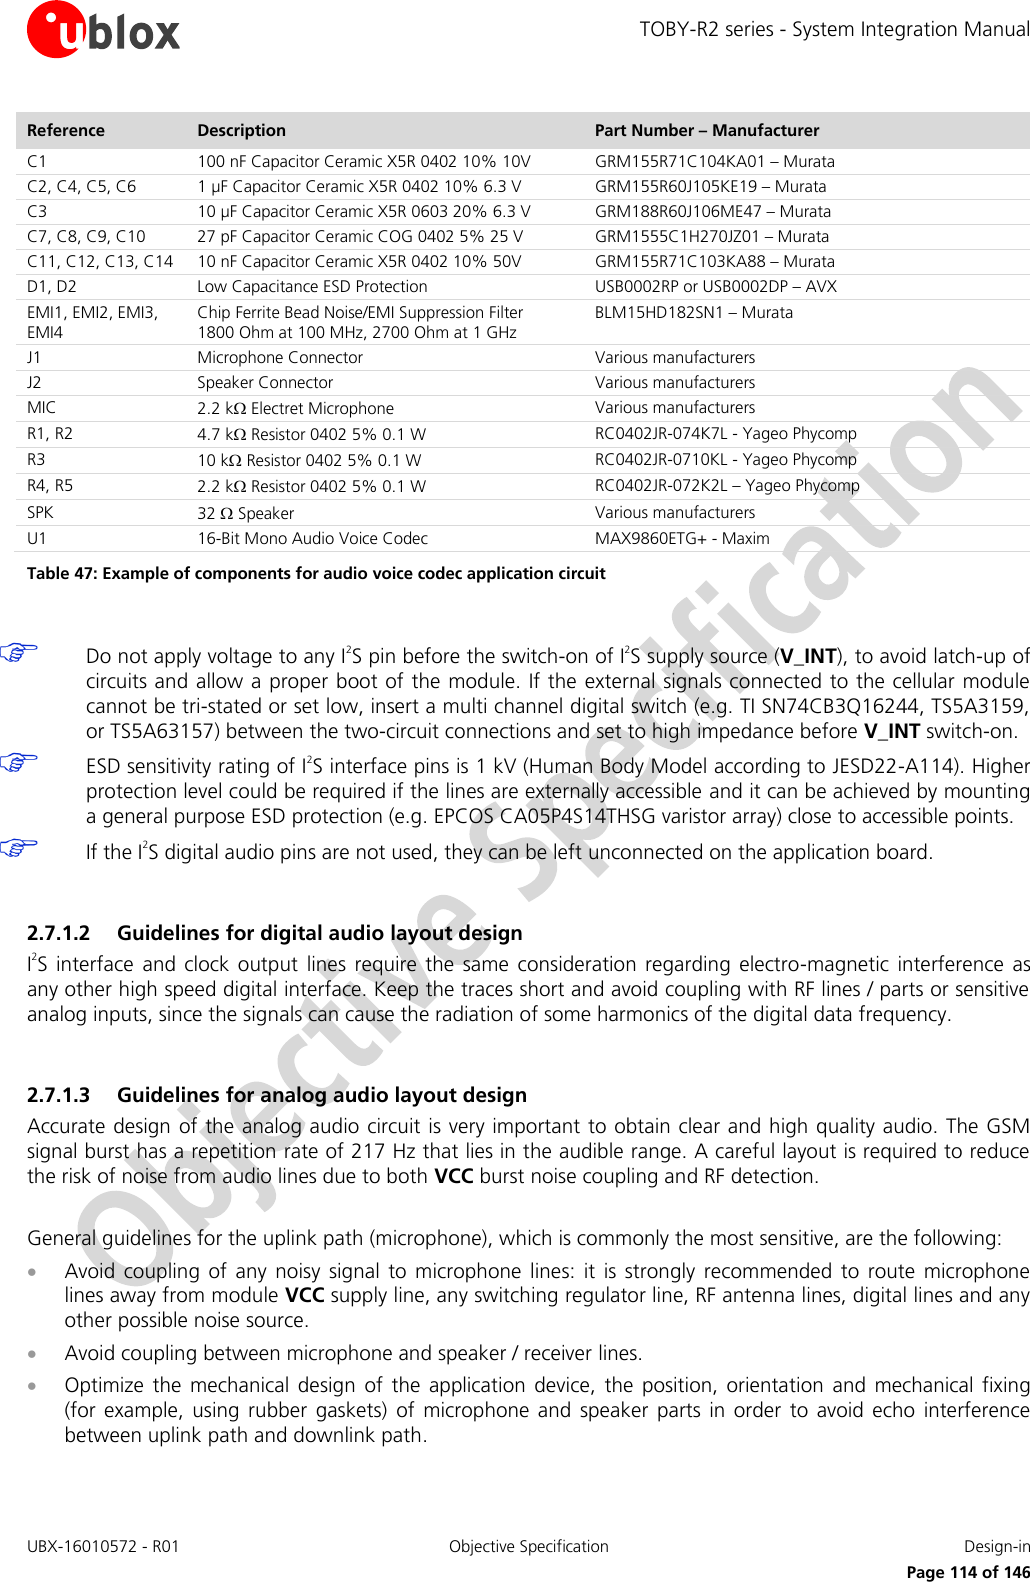 TOBY-R2 series - System Integration Manual UBX-16010572 - R01  Objective Specification  Design-in     Page 114 of 146 Reference Description Part Number – Manufacturer C1 100 nF Capacitor Ceramic X5R 0402 10% 10V GRM155R71C104KA01 – Murata C2, C4, C5, C6 1 µF Capacitor Ceramic X5R 0402 10% 6.3 V GRM155R60J105KE19 – Murata C3 10 µF Capacitor Ceramic X5R 0603 20% 6.3 V GRM188R60J106ME47 – Murata C7, C8, C9, C10 27 pF Capacitor Ceramic COG 0402 5% 25 V  GRM1555C1H270JZ01 – Murata C11, C12, C13, C14 10 nF Capacitor Ceramic X5R 0402 10% 50V GRM155R71C103KA88 – Murata D1, D2 Low Capacitance ESD Protection USB0002RP or USB0002DP – AVX EMI1, EMI2, EMI3, EMI4 Chip Ferrite Bead Noise/EMI Suppression Filter 1800 Ohm at 100 MHz, 2700 Ohm at 1 GHz BLM15HD182SN1 – Murata J1 Microphone Connector Various manufacturers  J2 Speaker Connector Various manufacturers  MIC 2.2 k Electret Microphone Various manufacturers R1, R2  4.7 k Resistor 0402 5% 0.1 W  RC0402JR-074K7L - Yageo Phycomp R3 10 k Resistor 0402 5% 0.1 W  RC0402JR-0710KL - Yageo Phycomp R4, R5 2.2 k Resistor 0402 5% 0.1 W  RC0402JR-072K2L – Yageo Phycomp SPK 32  Speaker Various manufacturers  U1 16-Bit Mono Audio Voice Codec MAX9860ETG+ - Maxim Table 47: Example of components for audio voice codec application circuit   Do not apply voltage to any I2S pin before the switch-on of I2S supply source (V_INT), to avoid latch-up of circuits and allow a proper boot of the module. If the external signals connected to the cellular module cannot be tri-stated or set low, insert a multi channel digital switch (e.g. TI SN74CB3Q16244, TS5A3159, or TS5A63157) between the two-circuit connections and set to high impedance before V_INT switch-on.  ESD sensitivity rating of I2S interface pins is 1 kV (Human Body Model according to JESD22-A114). Higher protection level could be required if the lines are externally accessible and it can be achieved by mounting a general purpose ESD protection (e.g. EPCOS CA05P4S14THSG varistor array) close to accessible points.  If the I2S digital audio pins are not used, they can be left unconnected on the application board.  2.7.1.2 Guidelines for digital audio layout design I2S  interface  and  clock output  lines require  the  same  consideration  regarding  electro-magnetic  interference  as any other high speed digital interface. Keep the traces short and avoid coupling with RF lines / parts or sensitive analog inputs, since the signals can cause the radiation of some harmonics of the digital data frequency.  2.7.1.3 Guidelines for analog audio layout design Accurate design of the analog audio circuit is very important to obtain clear and high quality audio. The GSM signal burst has a repetition rate of 217 Hz that lies in the audible range. A careful layout is required to reduce the risk of noise from audio lines due to both VCC burst noise coupling and RF detection.  General guidelines for the uplink path (microphone), which is commonly the most sensitive, are the following:  Avoid  coupling  of  any  noisy  signal  to  microphone  lines:  it is  strongly  recommended  to  route  microphone lines away from module VCC supply line, any switching regulator line, RF antenna lines, digital lines and any other possible noise source.  Avoid coupling between microphone and speaker / receiver lines.  Optimize  the  mechanical  design  of the  application  device,  the position,  orientation  and  mechanical fixing (for  example,  using  rubber  gaskets)  of  microphone and  speaker  parts  in order  to  avoid  echo  interference between uplink path and downlink path. 